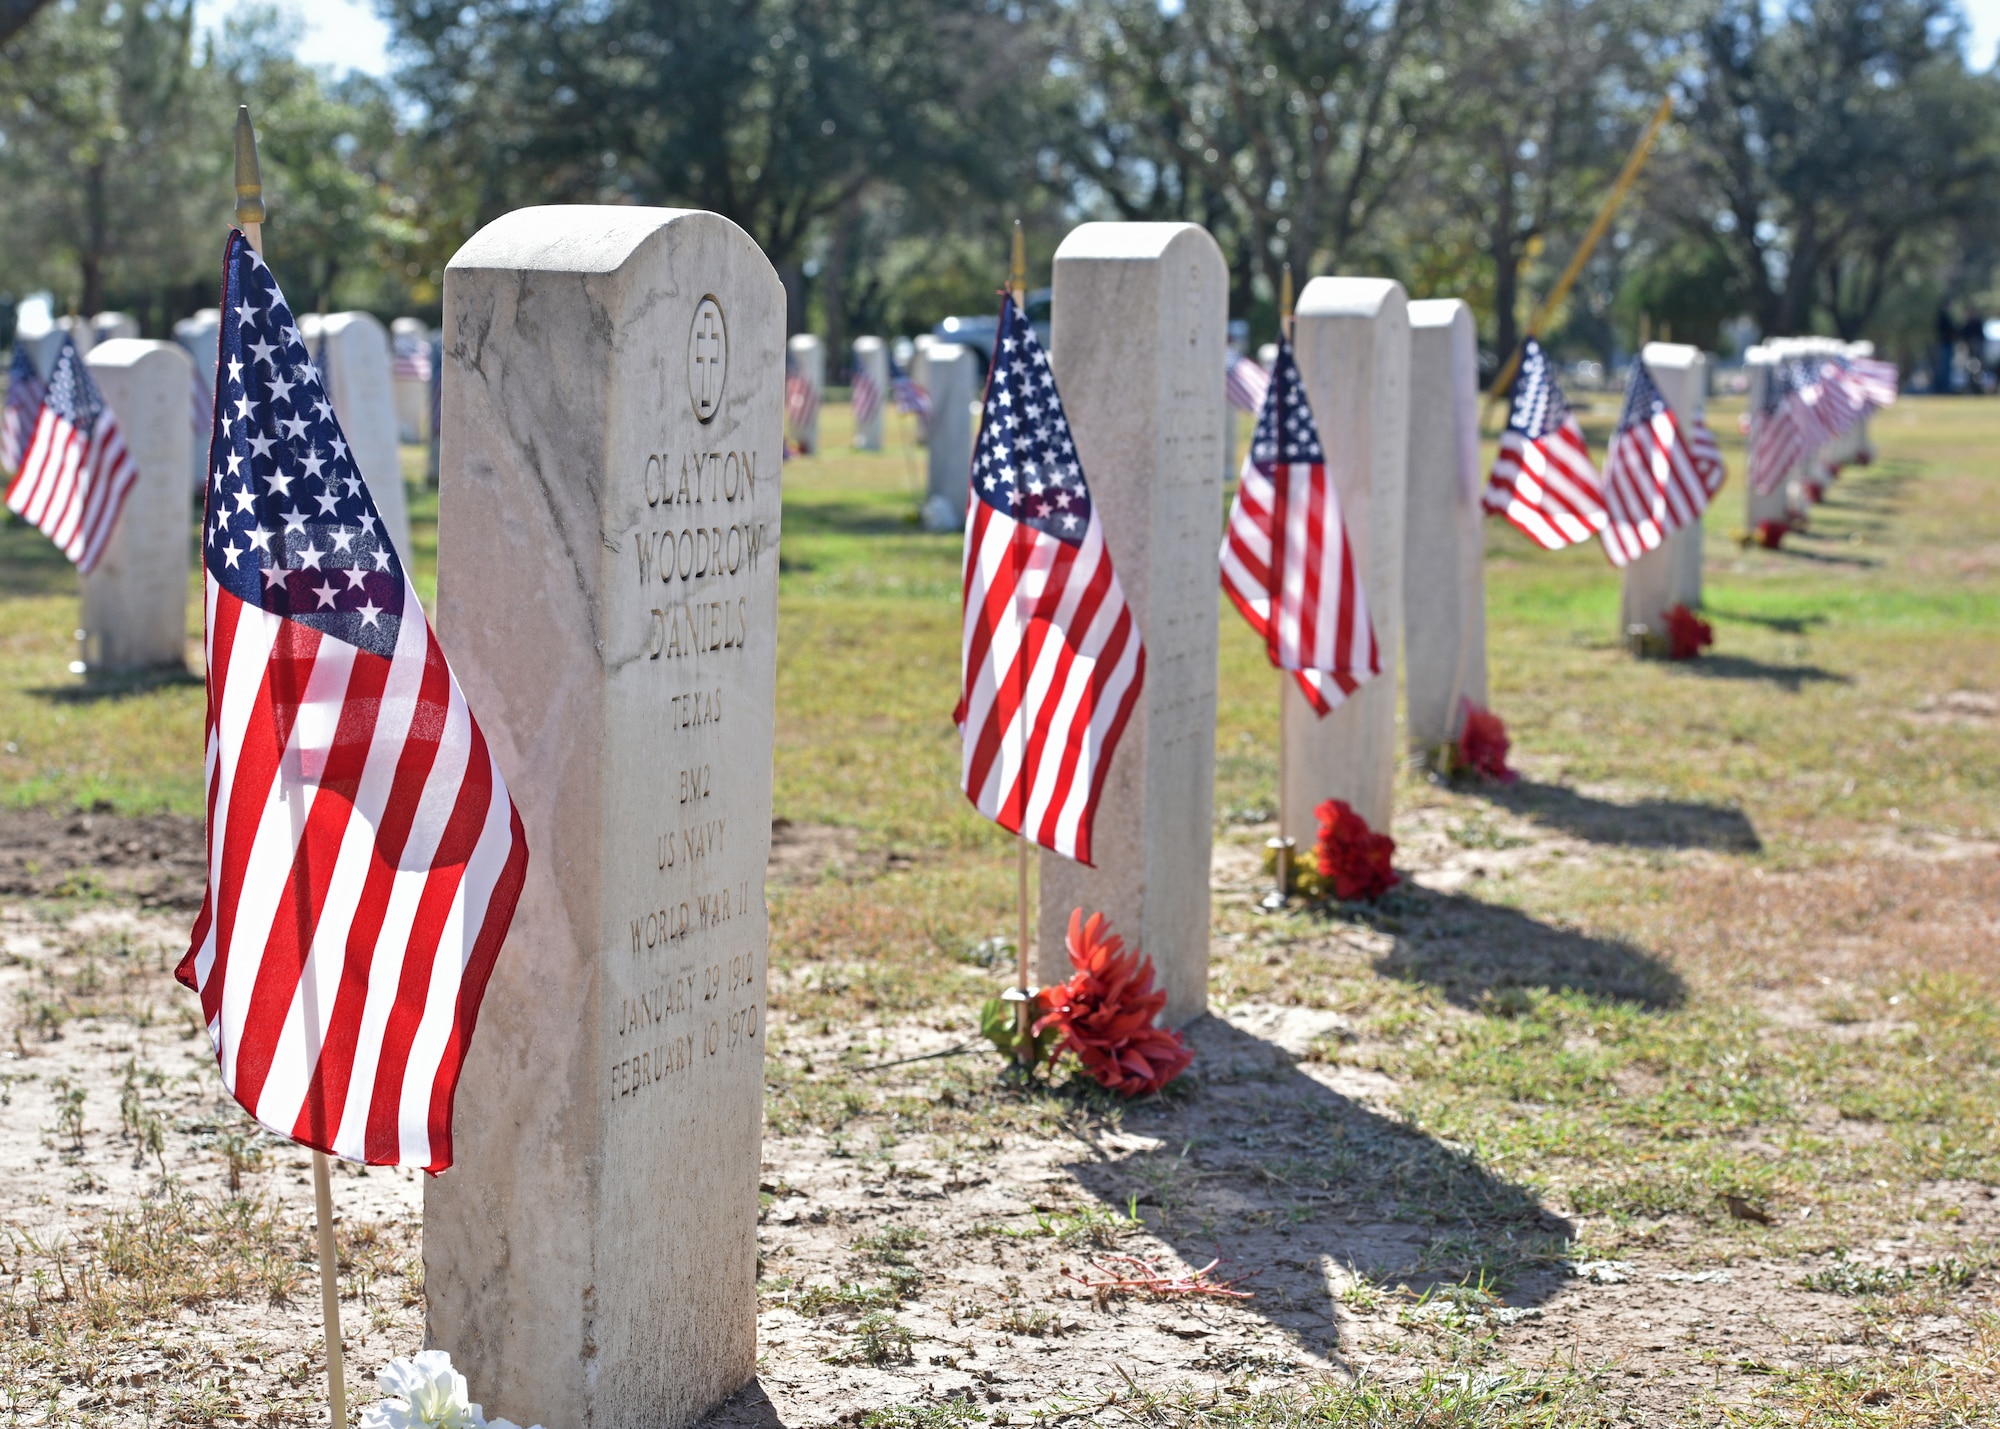 The Fairmount Cemetery in San Angelo, Texas. Nov. 11, 2021. Prior to Veterans Day, volunteers from the San Angelo and Goodfellow Air Force Base community came together to honor fallen veterans by placing flags near their grave stones.  (U.S. Air Force photo by Senior Airman Ashley Thrash)